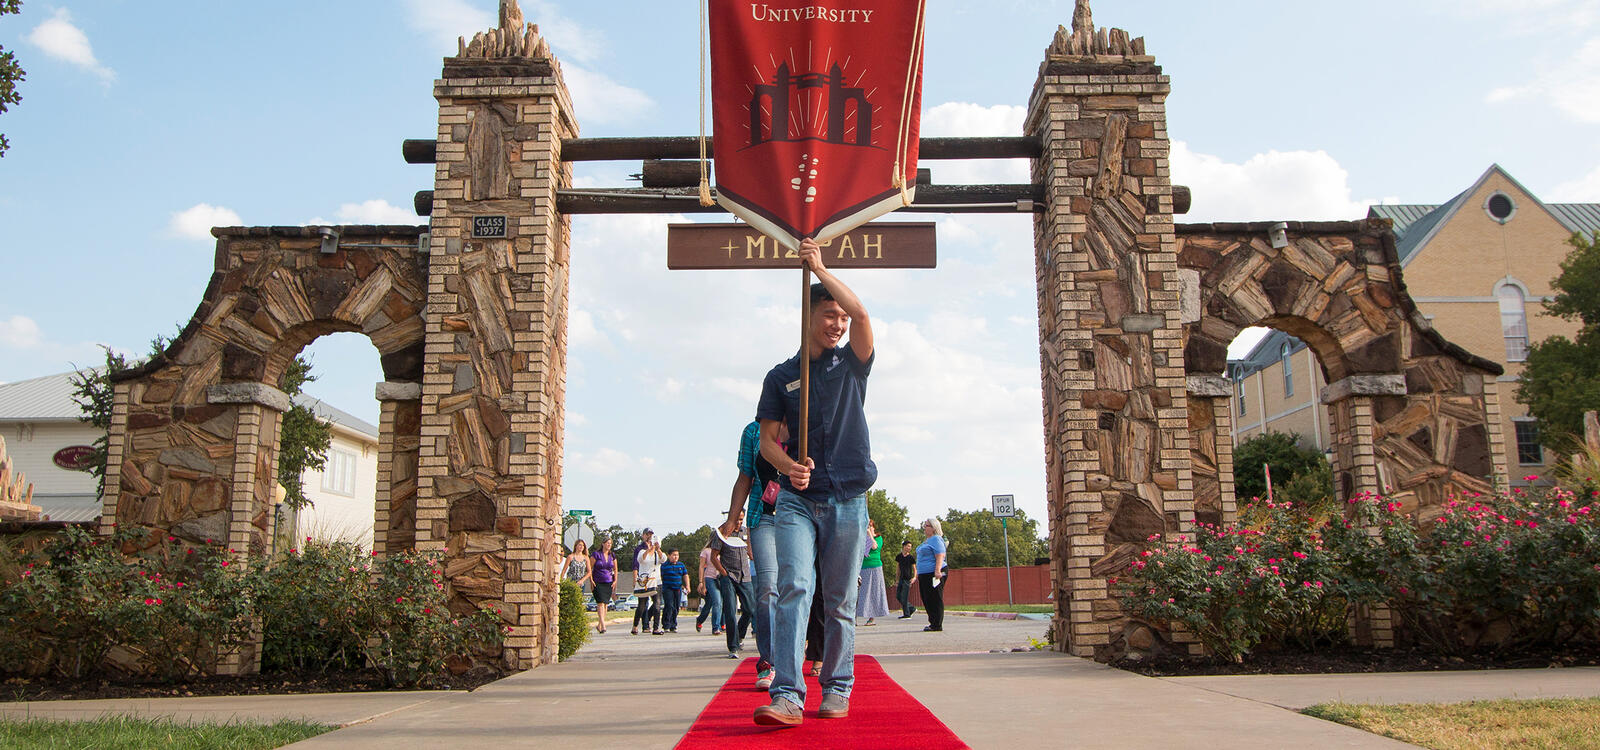 Student in front holds a SWAU banner as he leads incoming freshman down a red carpet through the Mizpah gate